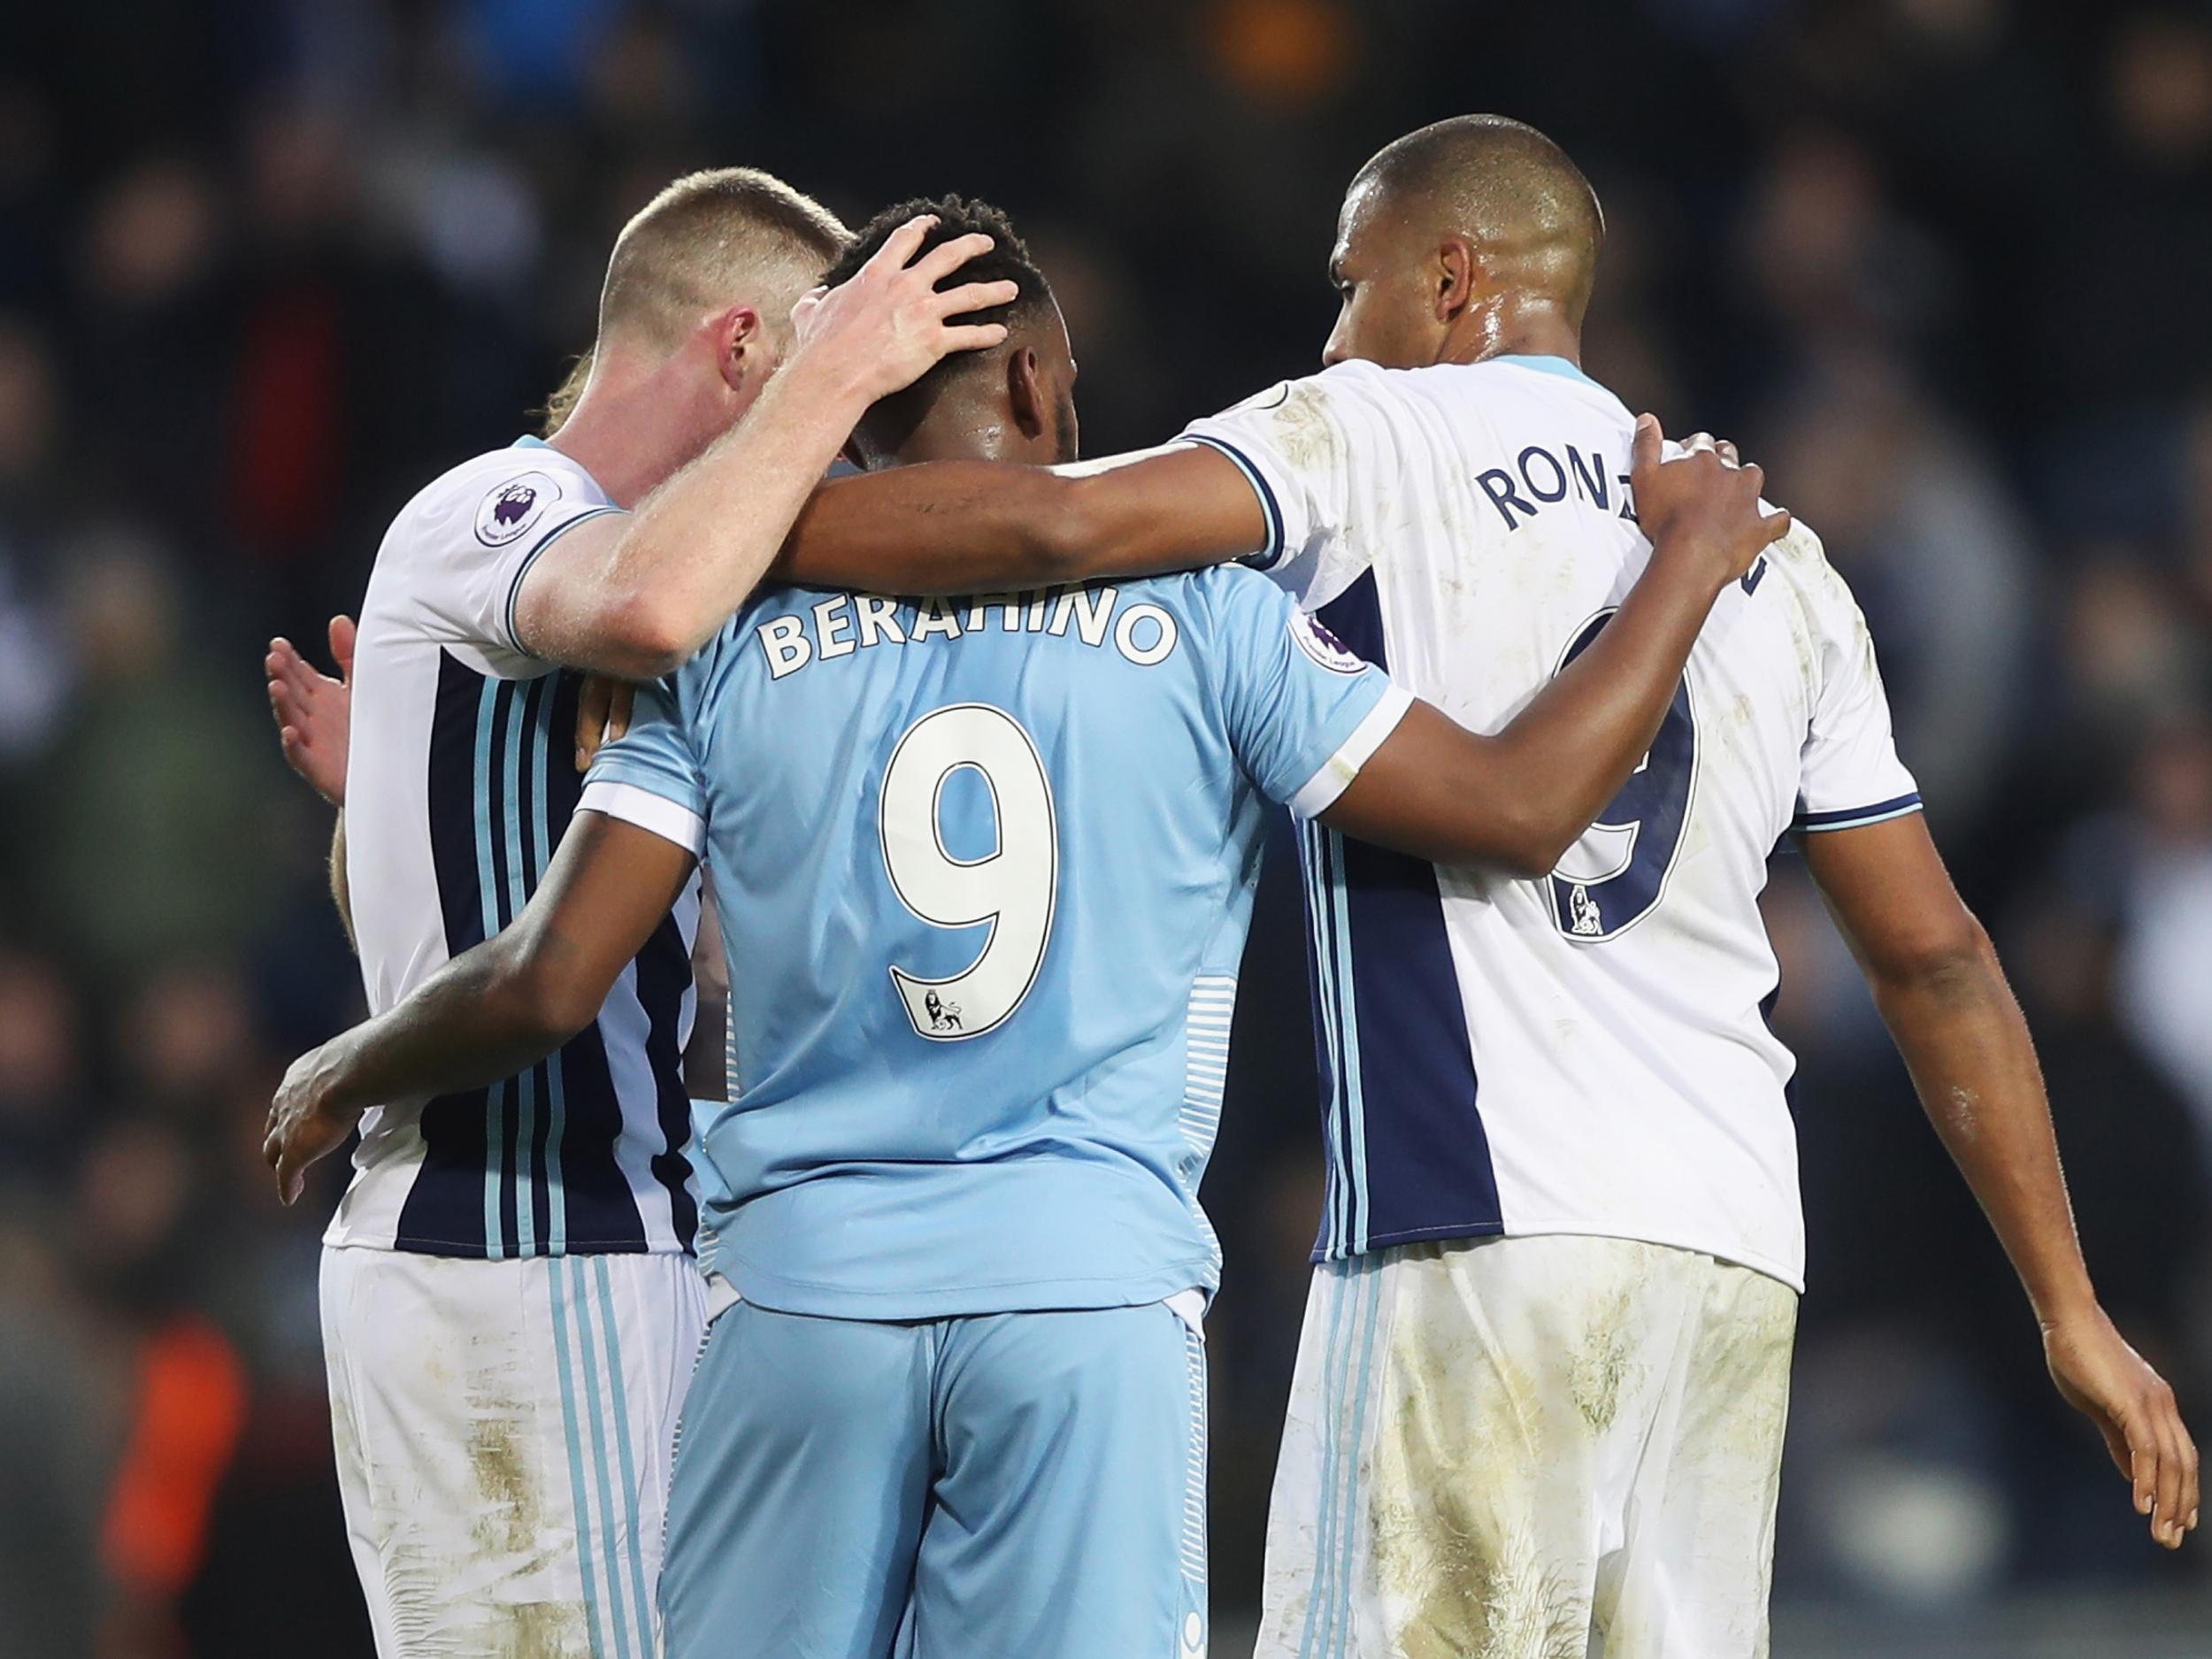 Berahino was given an eight-week ban for a failed drugs test, it was revealed this week